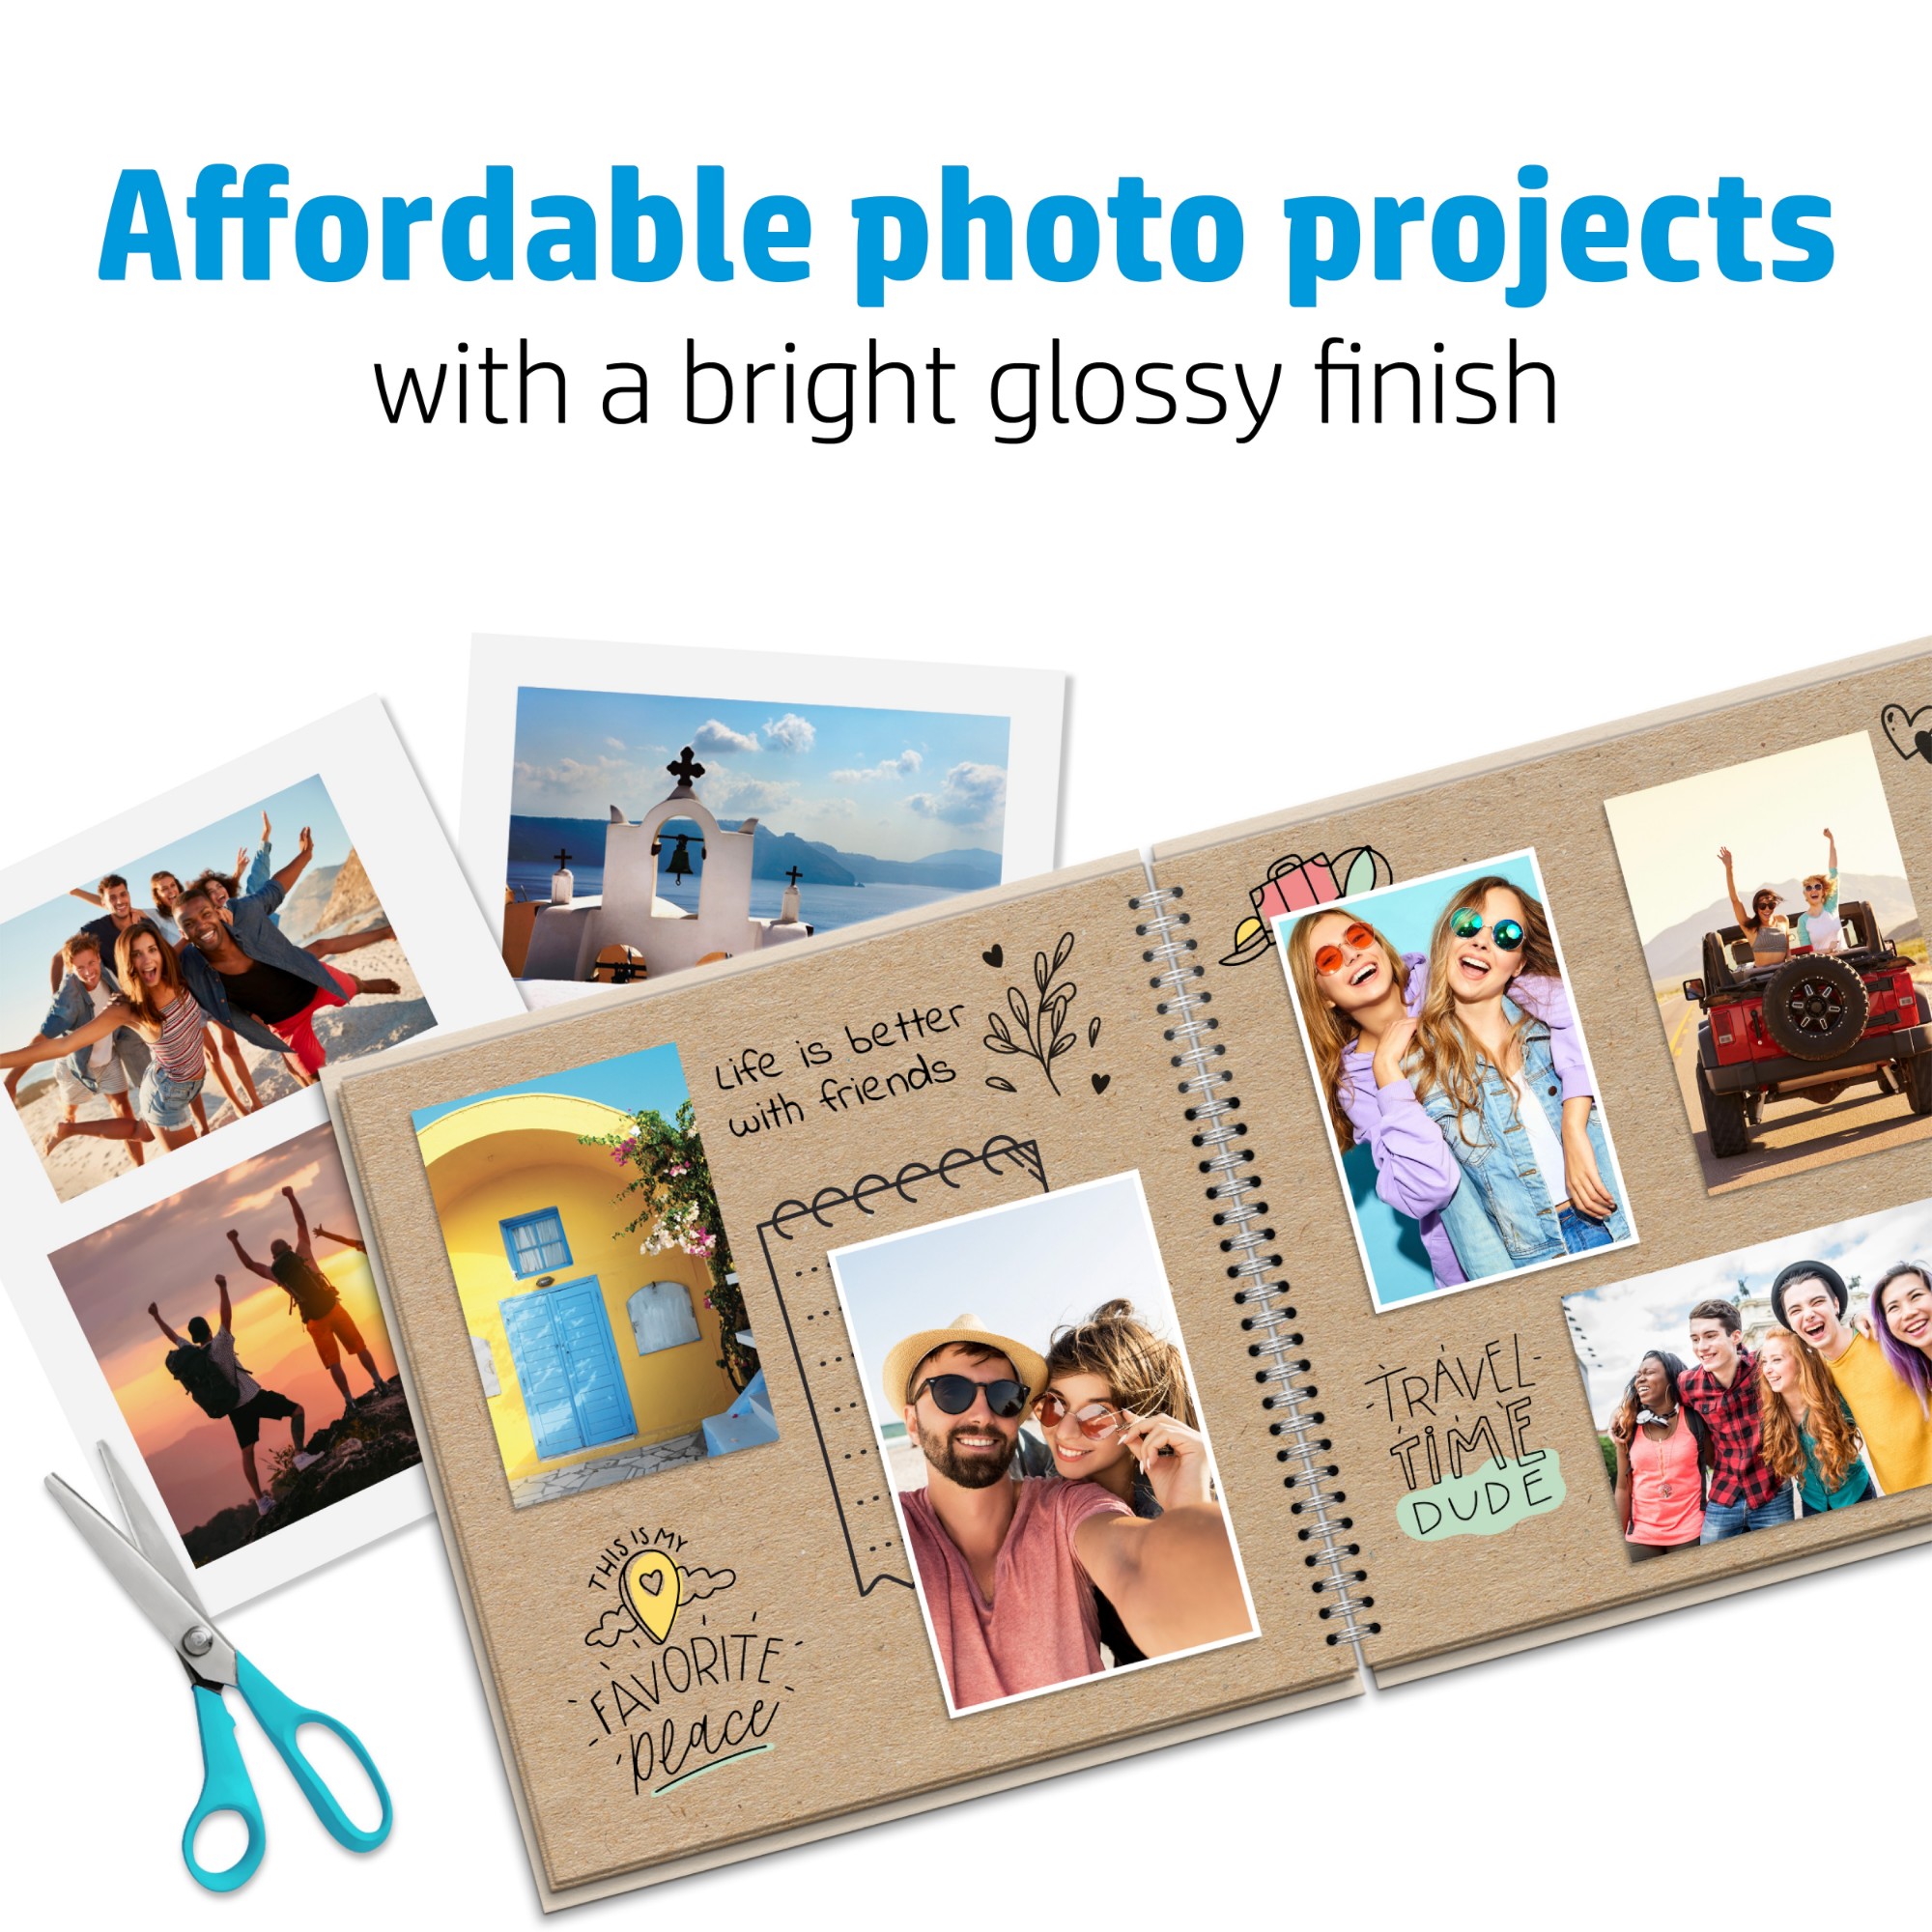 HP Everyday Photo Paper, Glossy, 200 g/m2, A4 (210 x 297 mm), 25 sheets